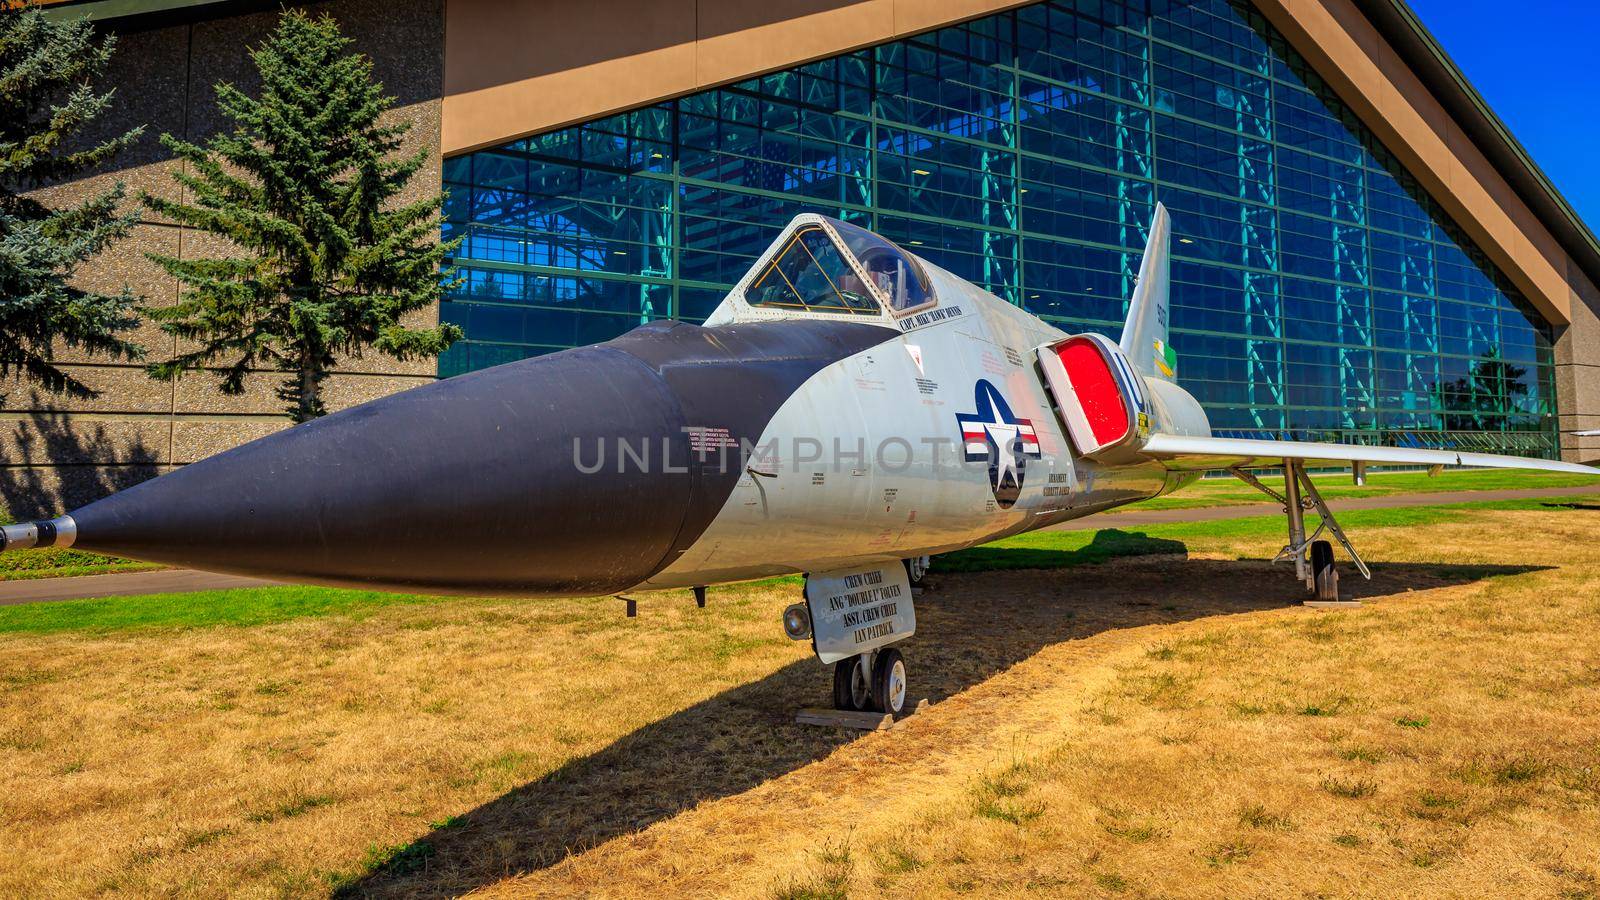 McMinnville, Oregon - August 21, 2017: US Air Force Convair F-106 Delta Dart on exhibition at Evergreen Aviation & Space Museum.